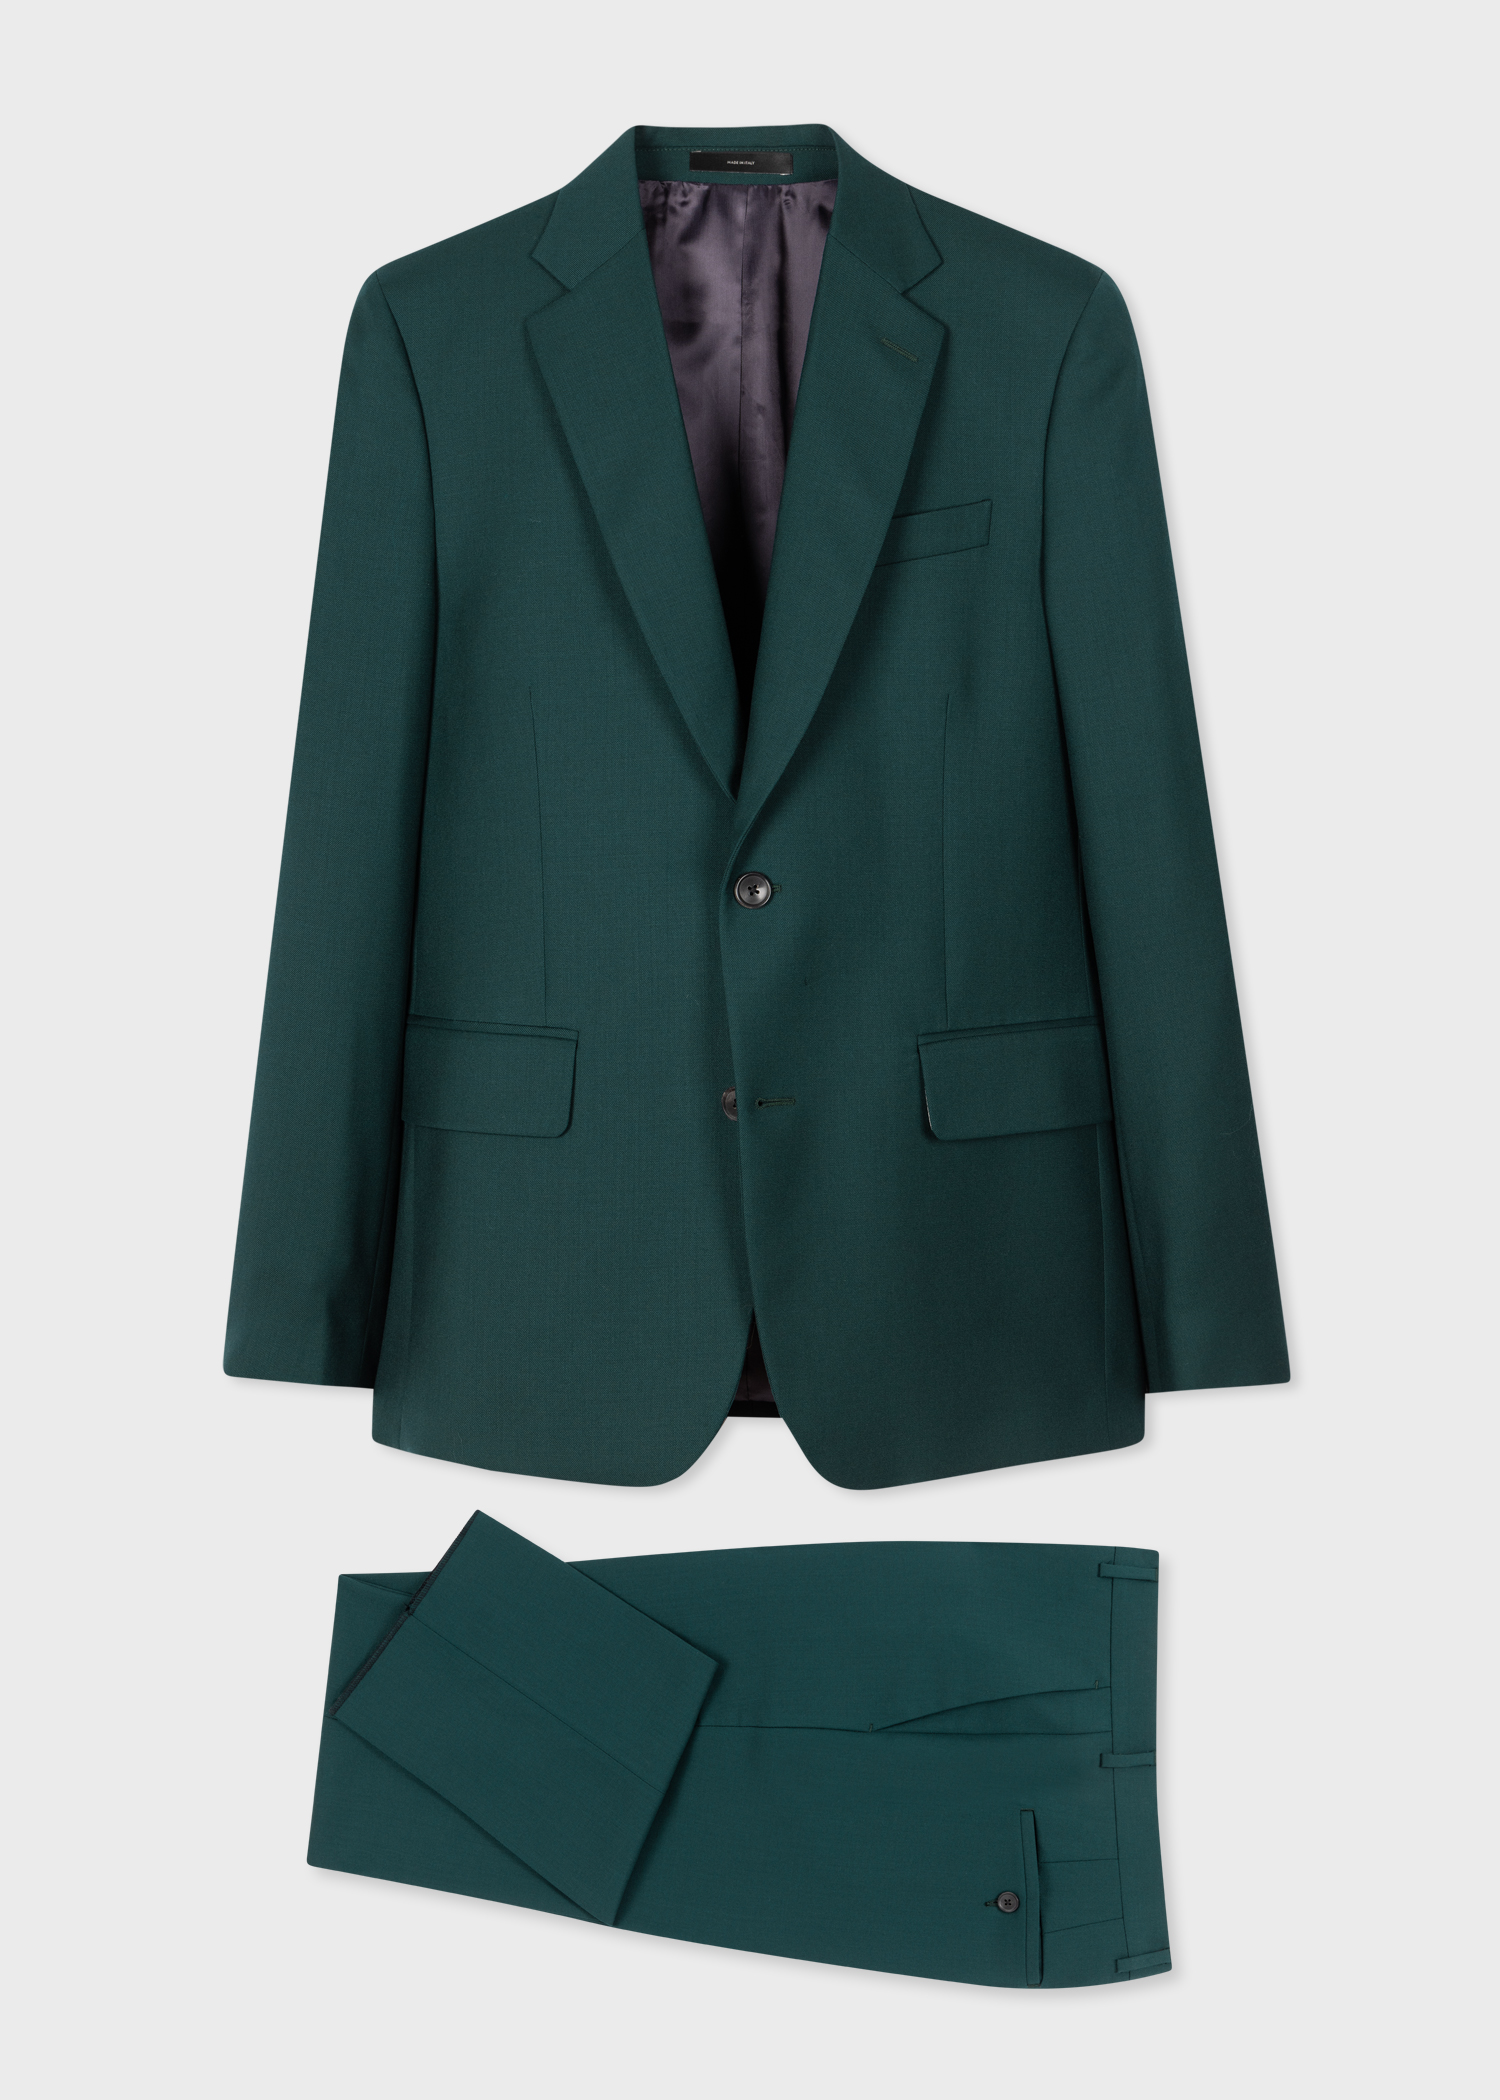 A Suit To Travel In | Paul Smith